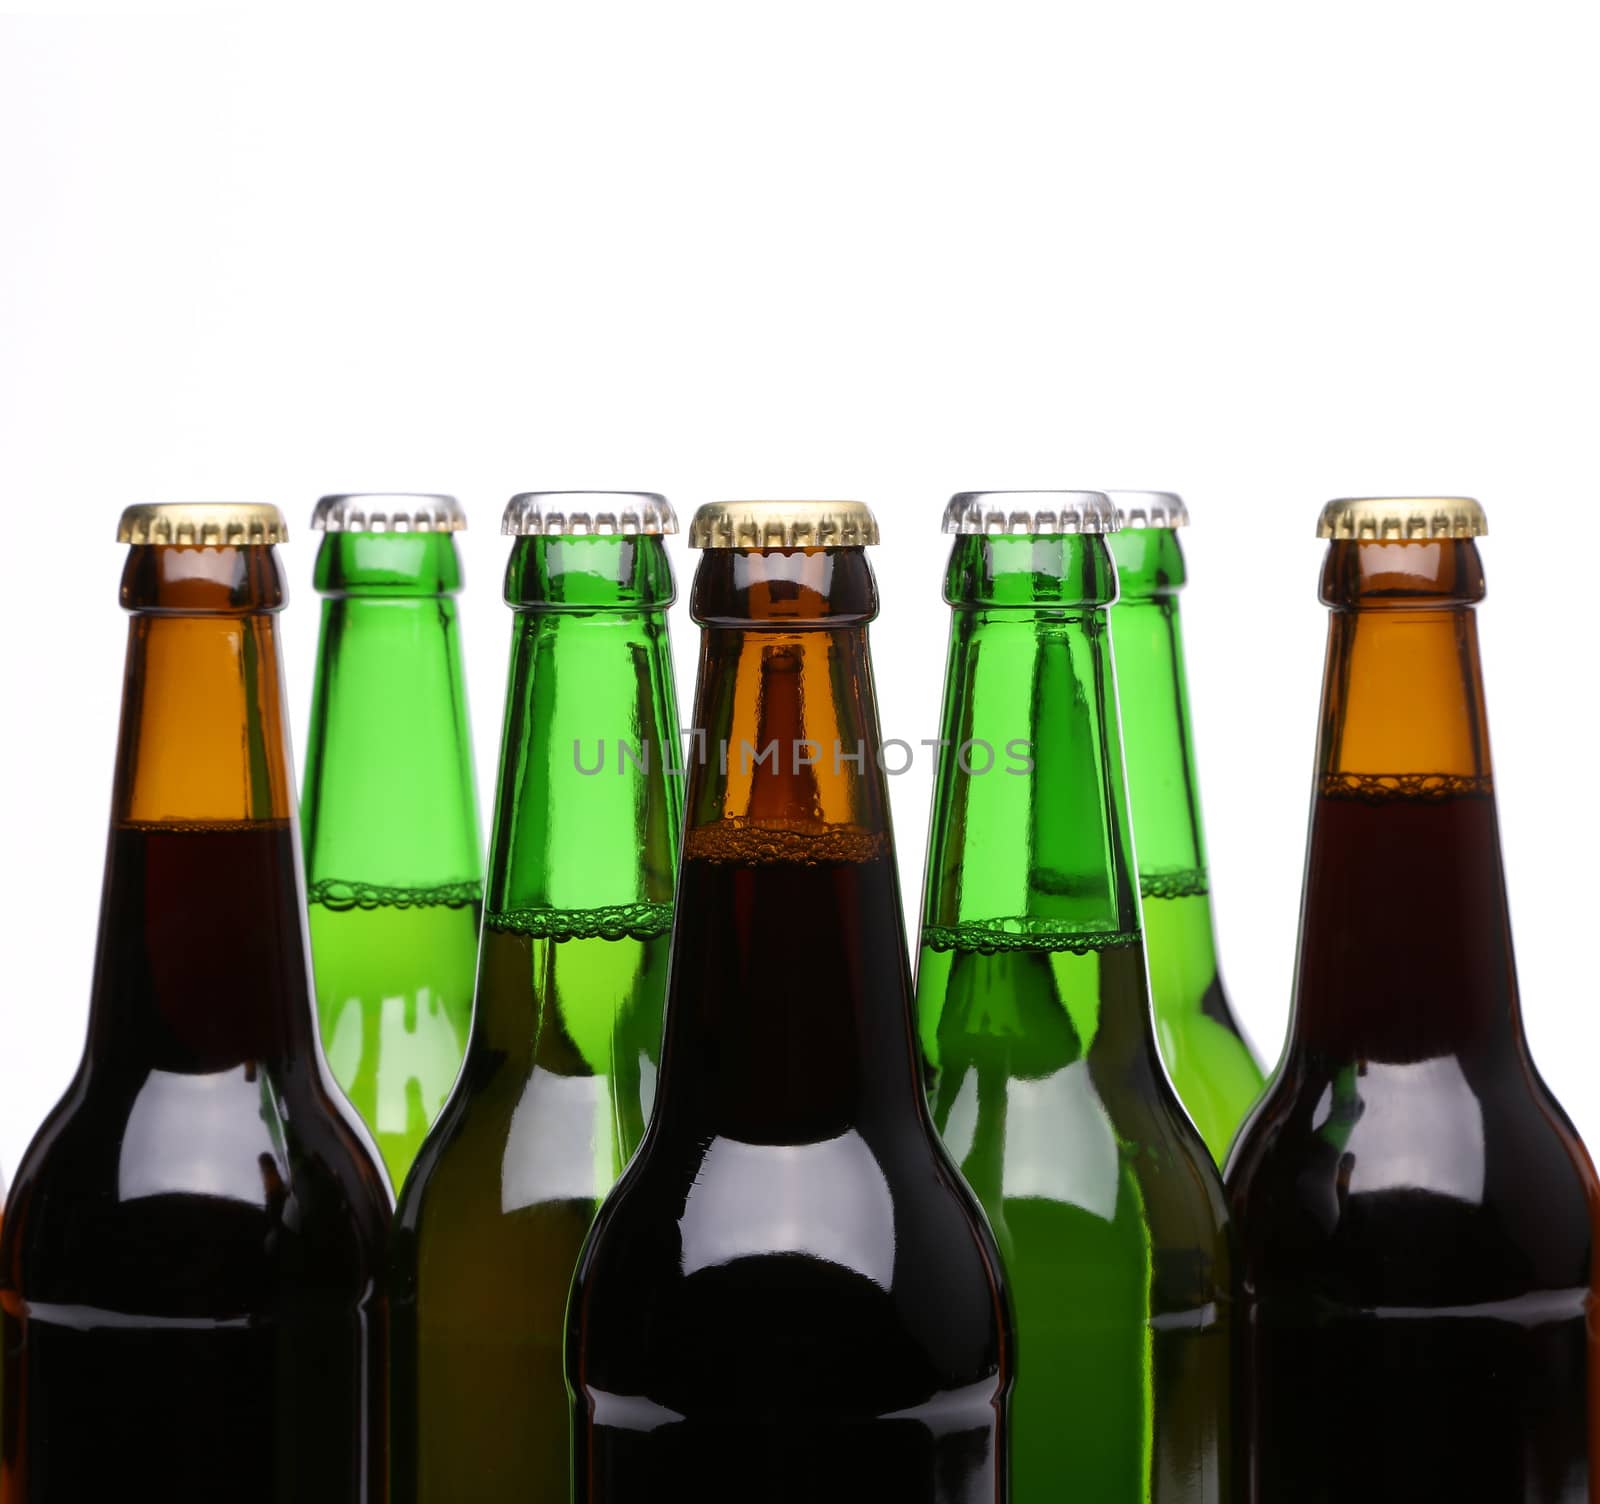 Closed bottles of beer isolated on a white background